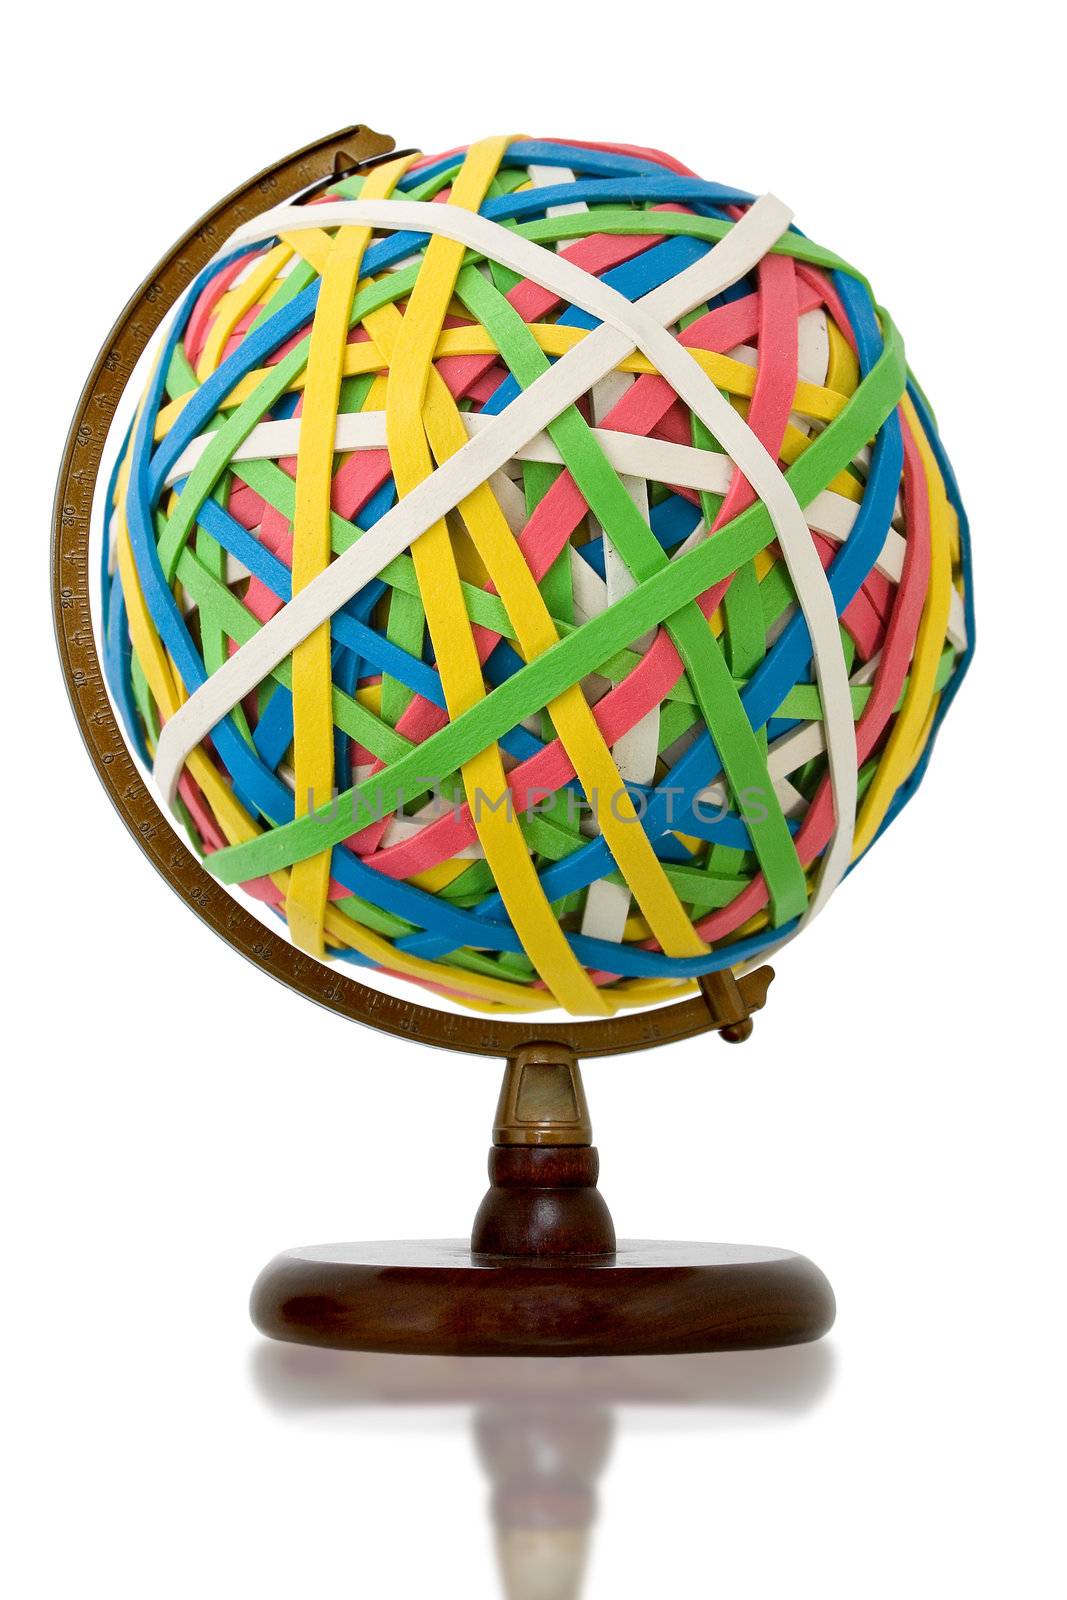 Huge rubber band ball held on wooden globe stand.